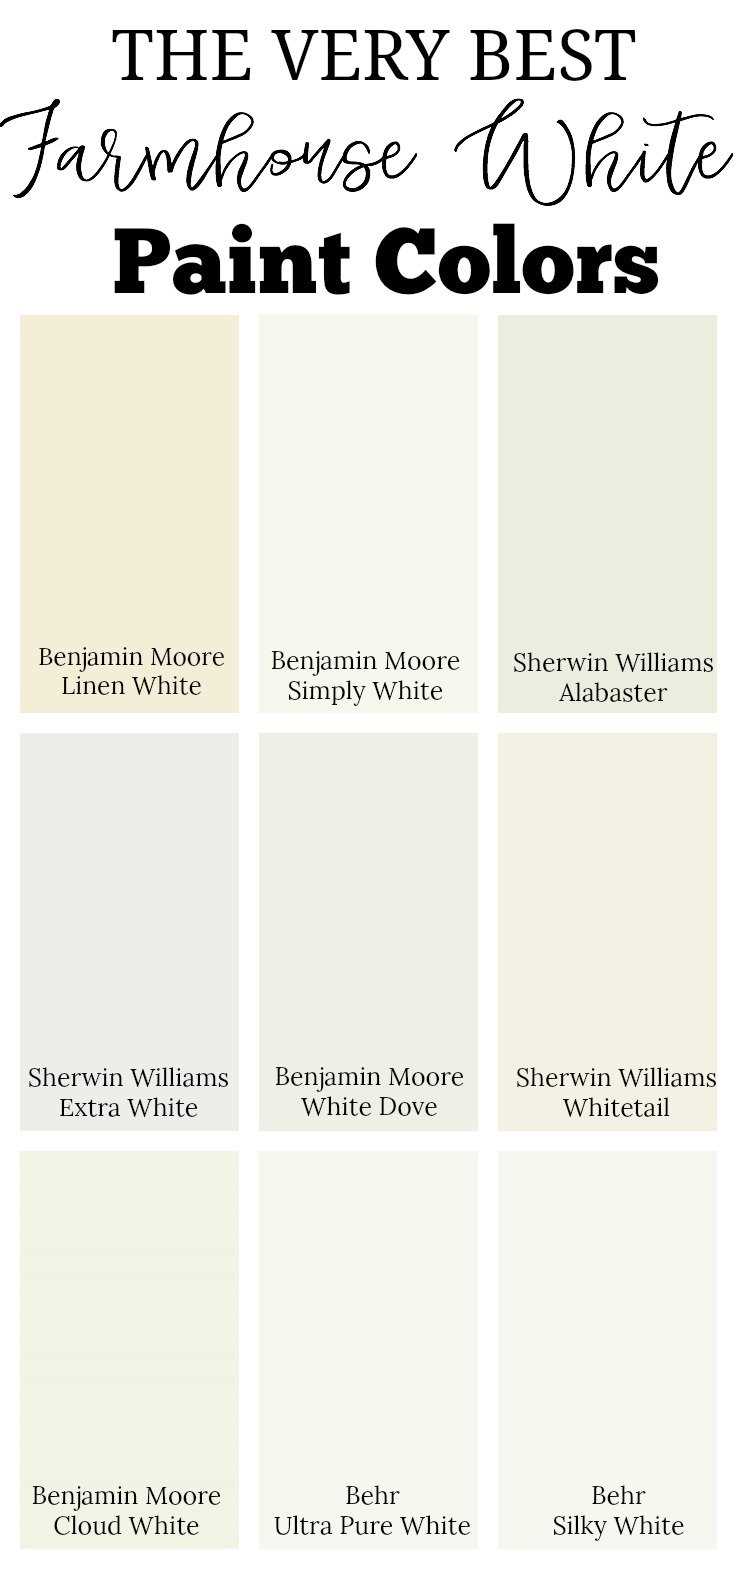 How Swiss Coffee Sherwin Williams complements any interior style